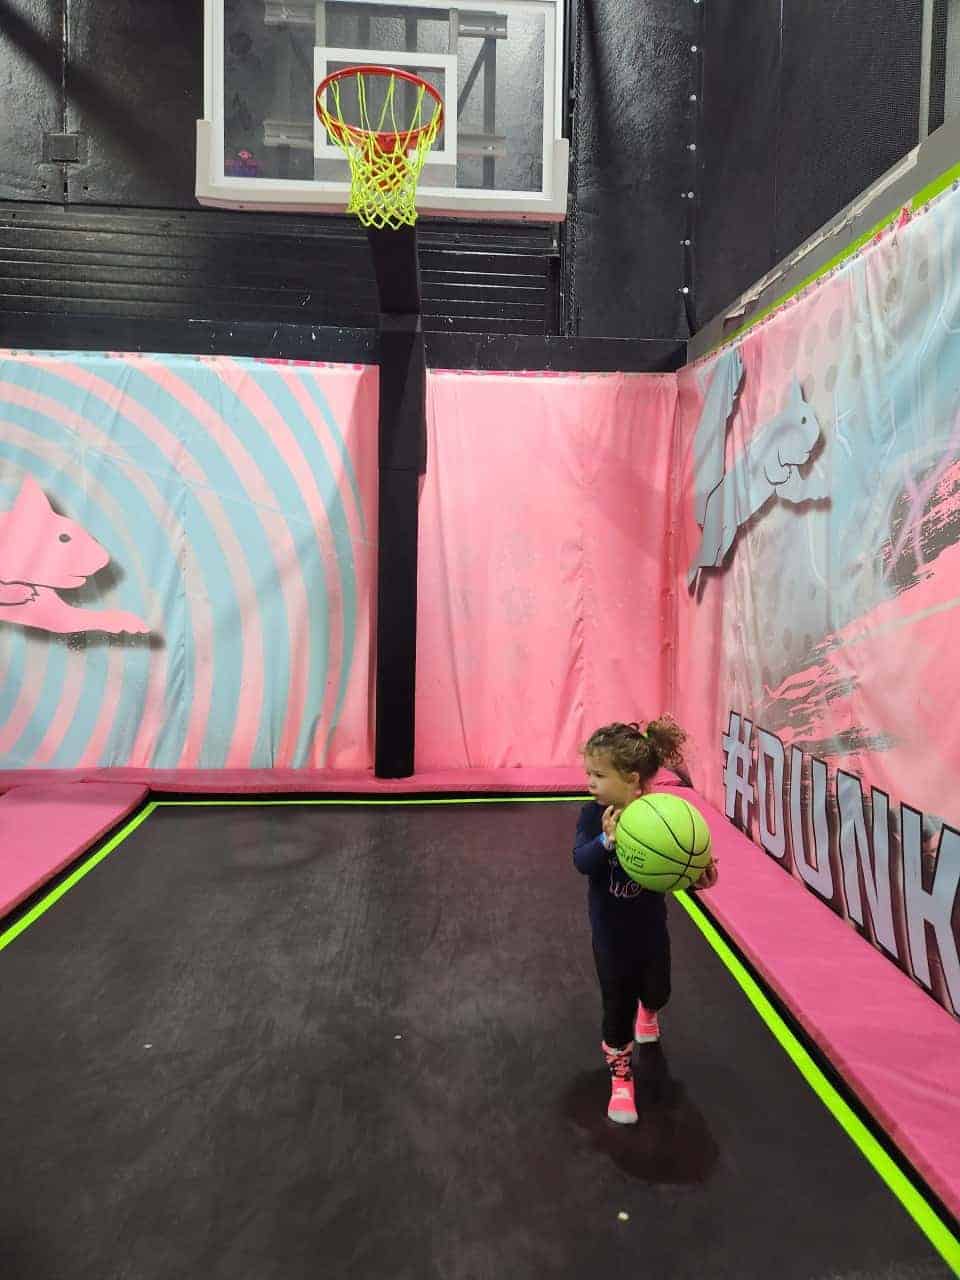 Flying Squirrel Jumping Basketball Area - Shoot some hoops while jumping, twisting and spinning. A fun way to play basketball...on trampolines! 